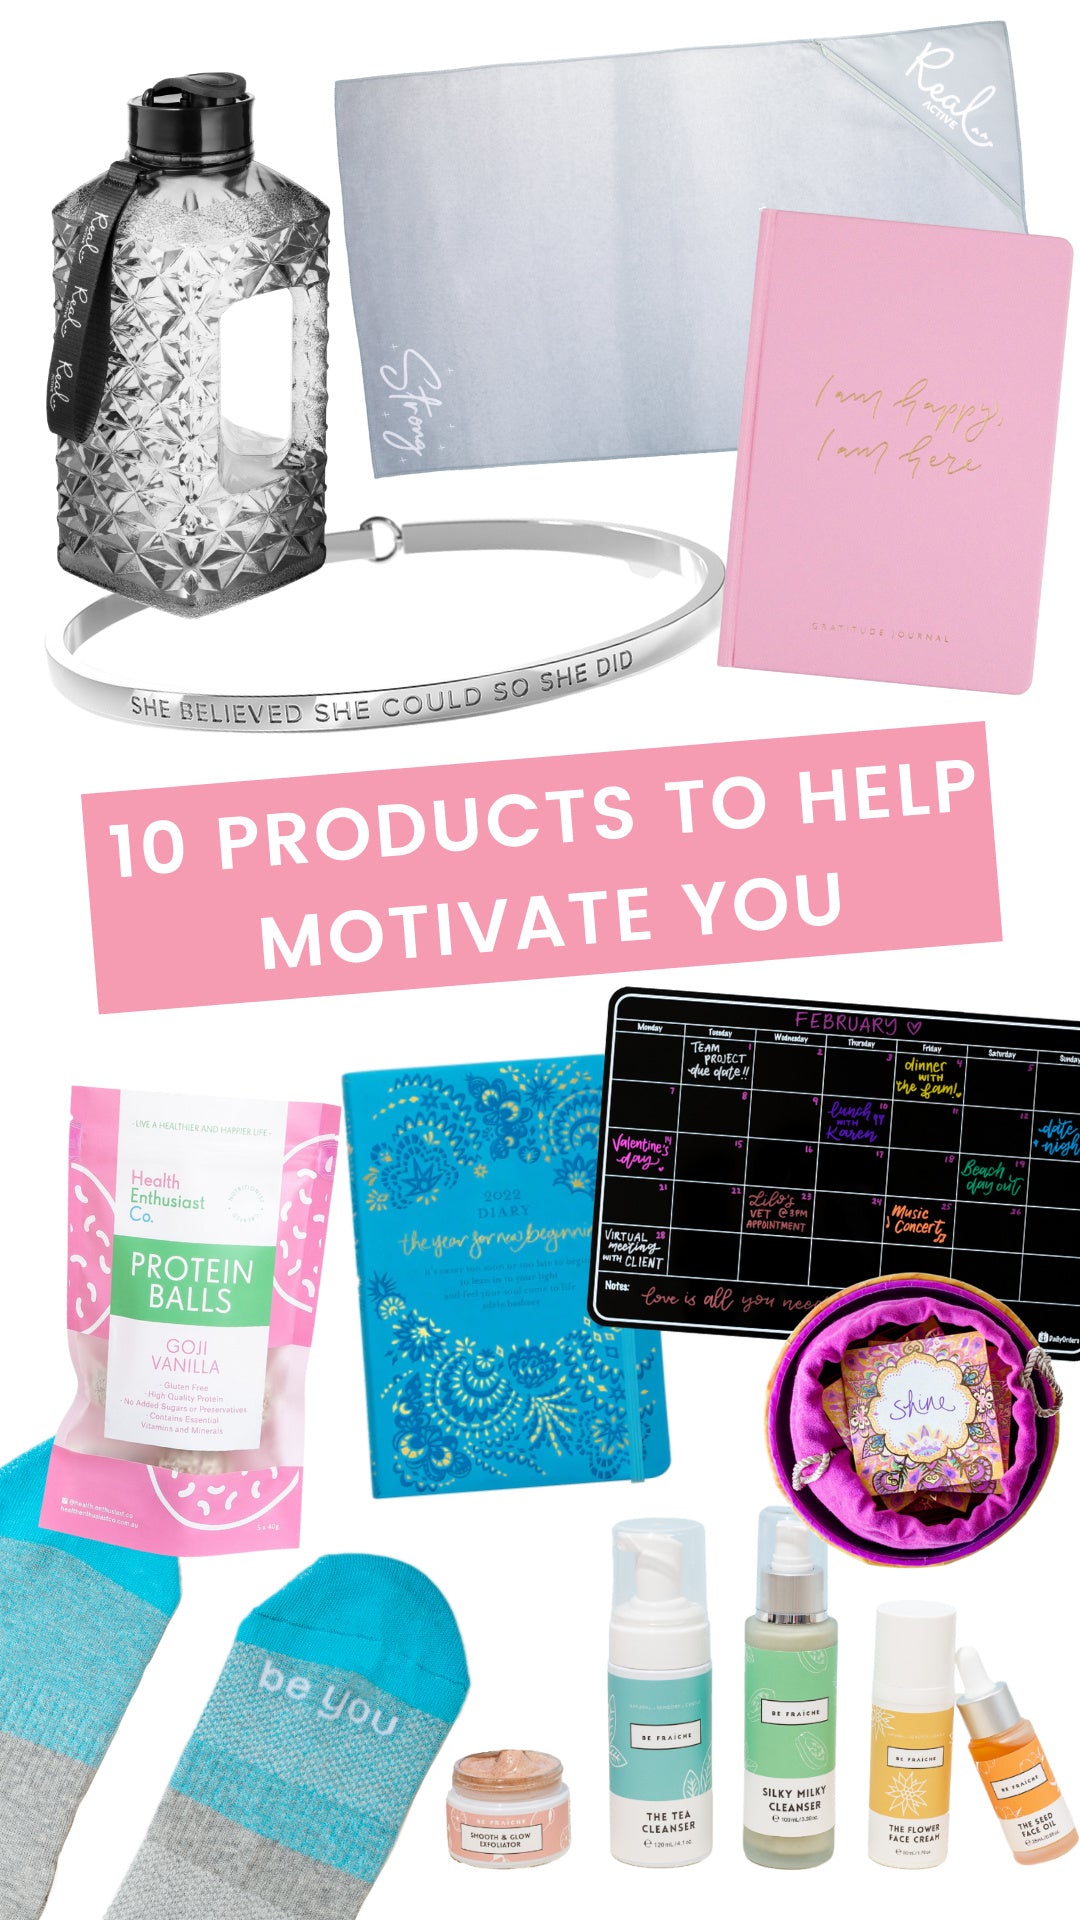 10 Products to Help Motivate You in 2022